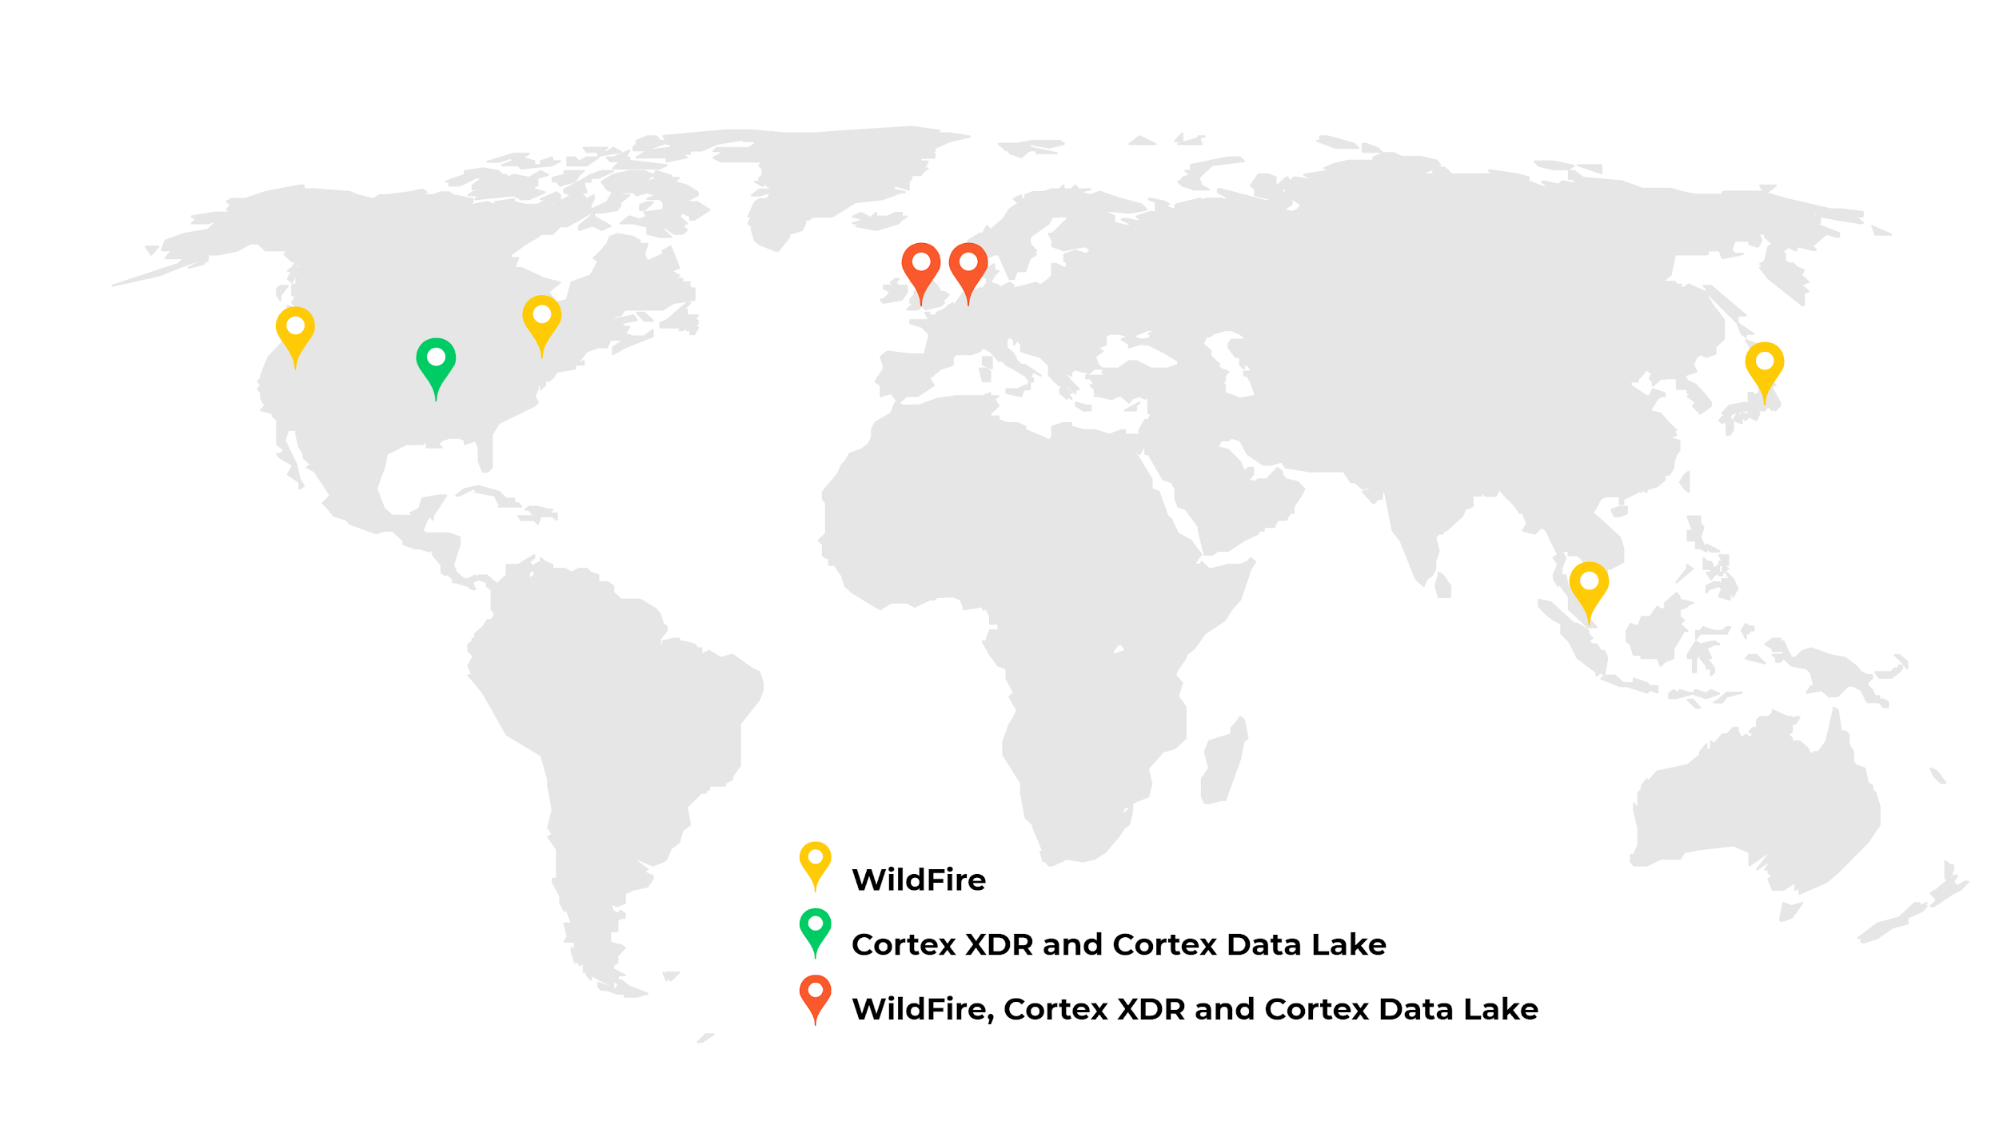 A new cloud hosting location in the UK augments locations in the United States, European Union and Asia. The map shows the locations of cloud hosting for WildFire, Cortex XDR and Cortex Data Lake. 